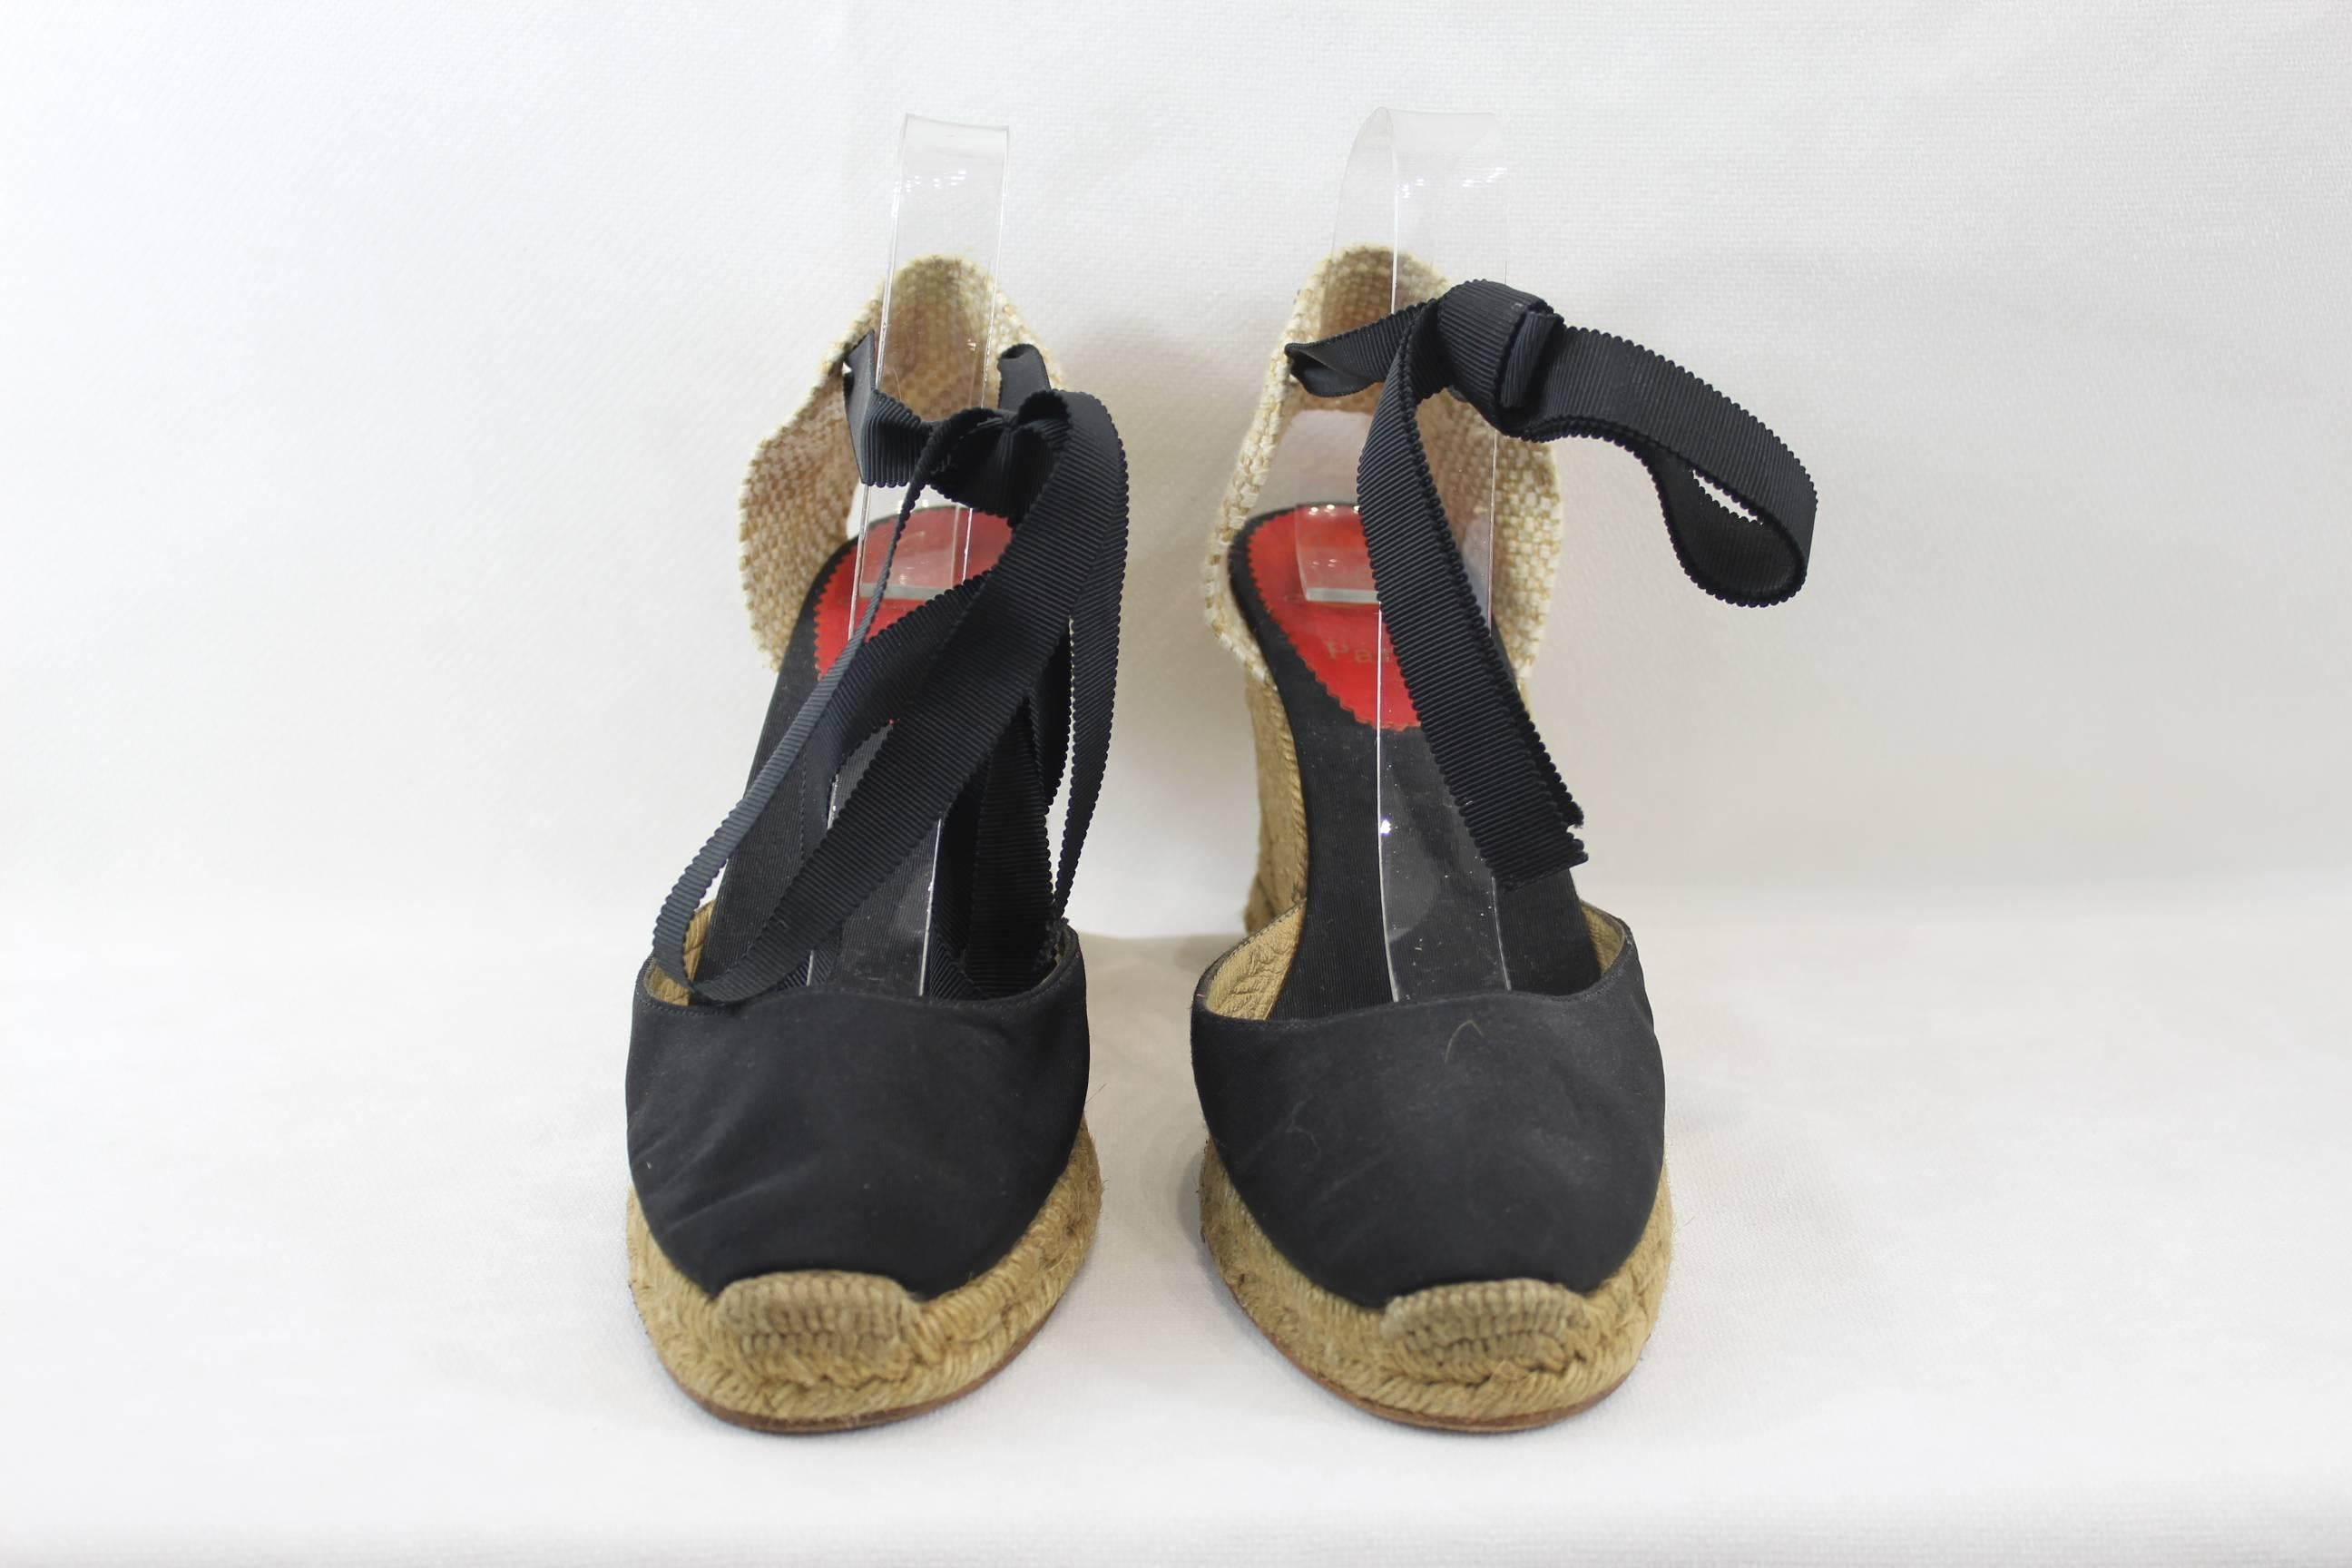 Christian Louboutin nice black canvas  Espadrilles  in blakc leather and cord.

Fair condition, they have been used but they can still be loved.
red sole almost dissapeared.

Size EU 39 